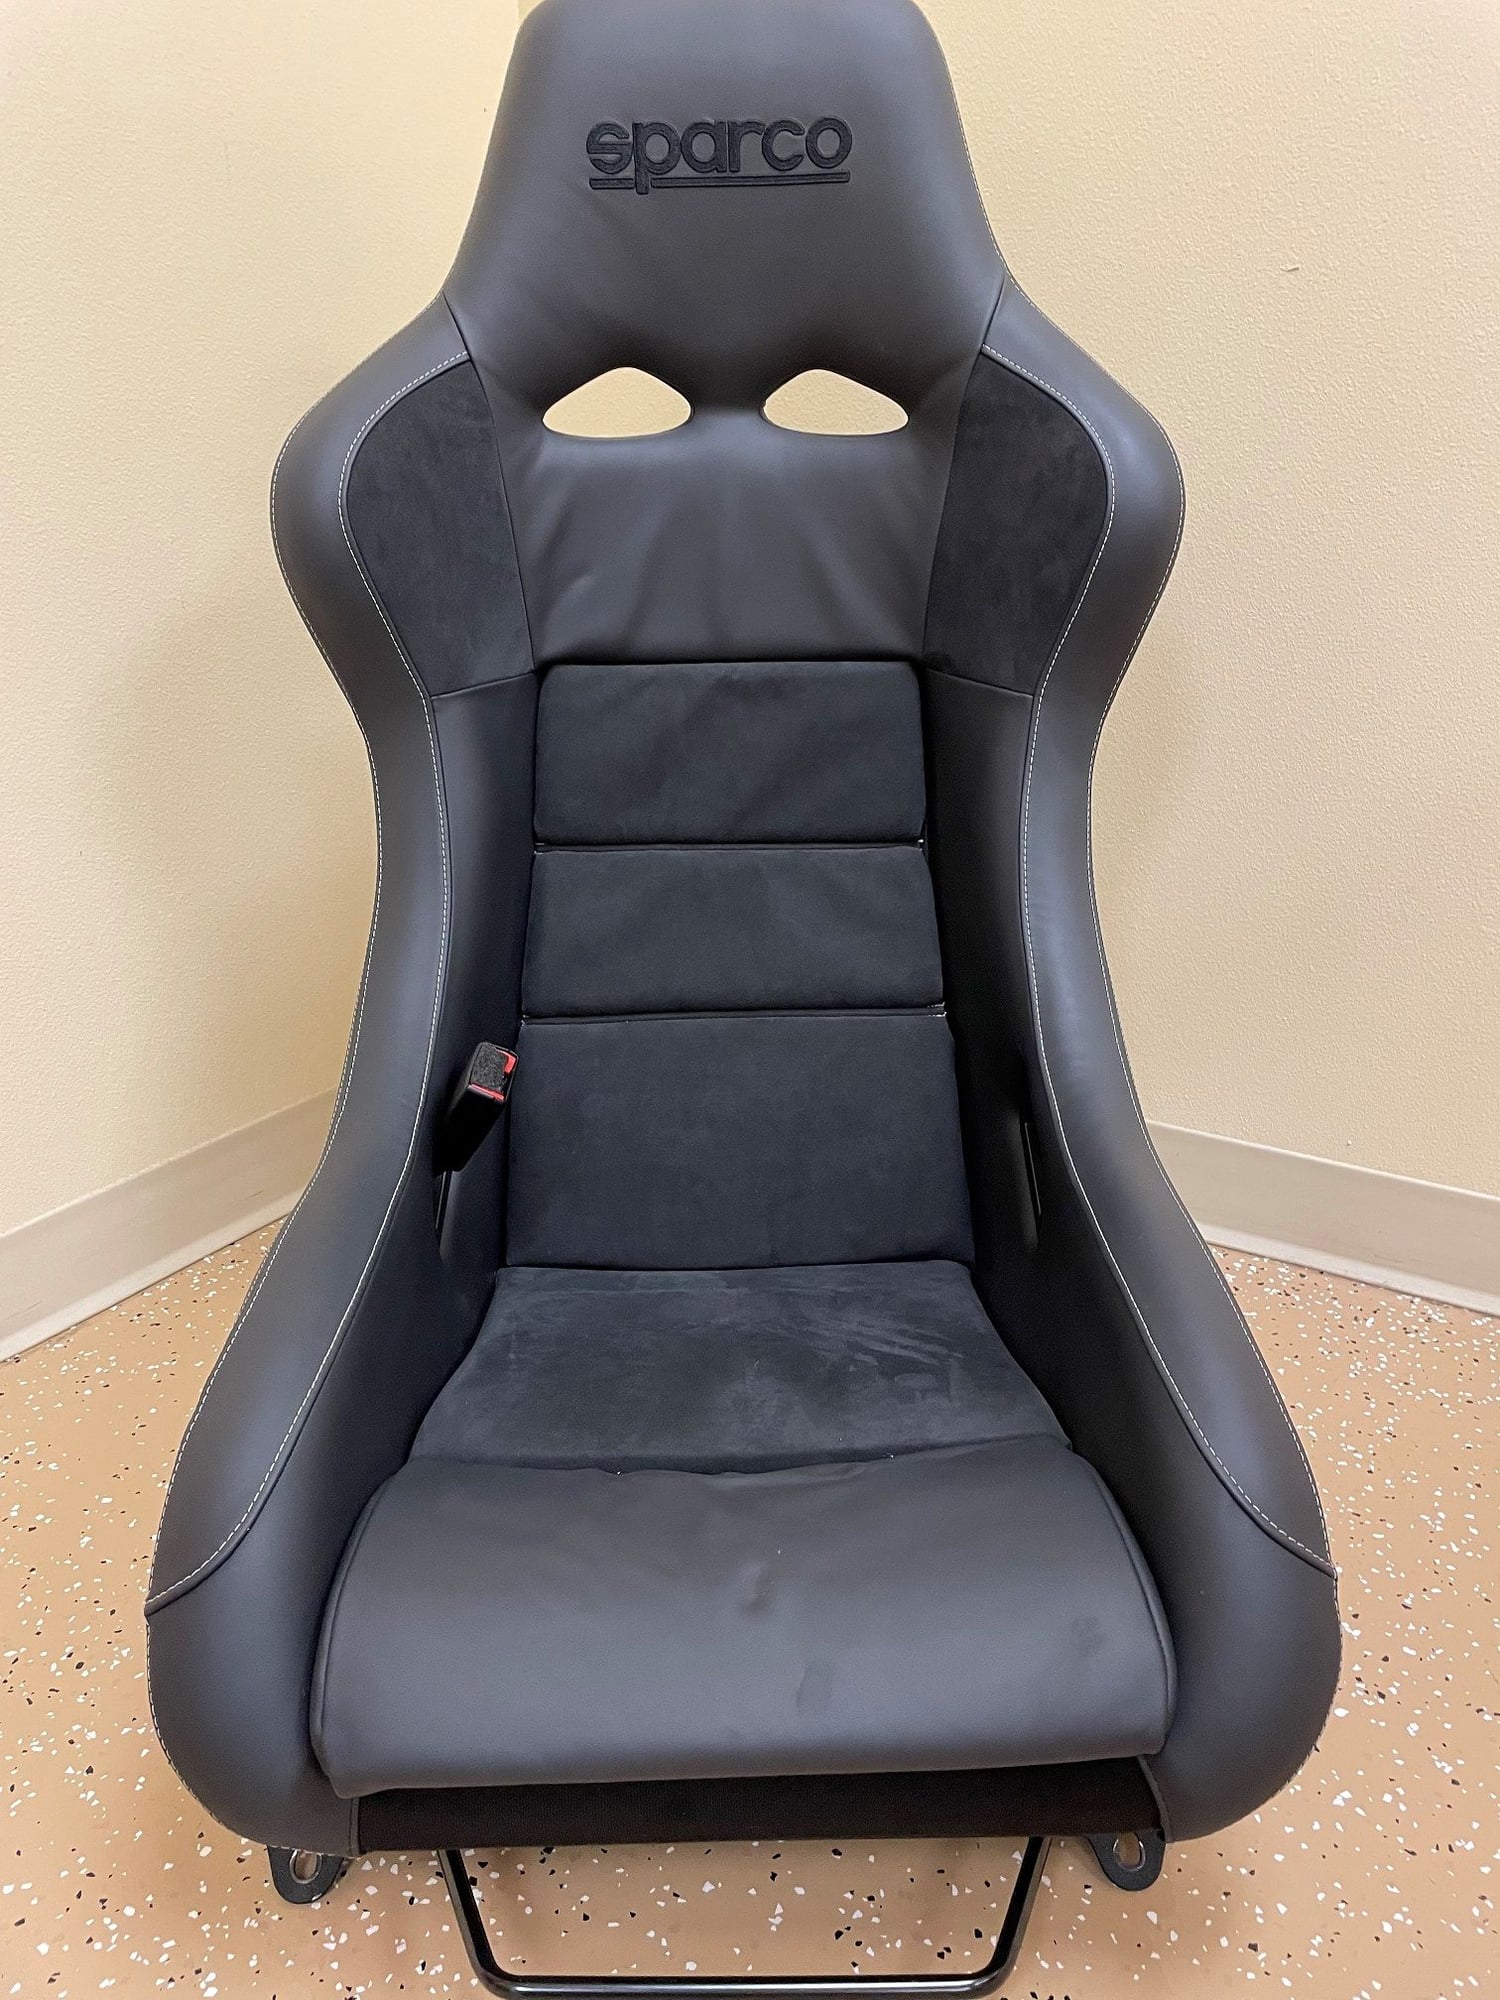 Interior/Upholstery - Sparco QRT Race Seat - Used - 2020 to 2021 Porsche Cayman GT4 - 2015 to 2020 Porsche 911 - Melbourne, FL 32901, United States